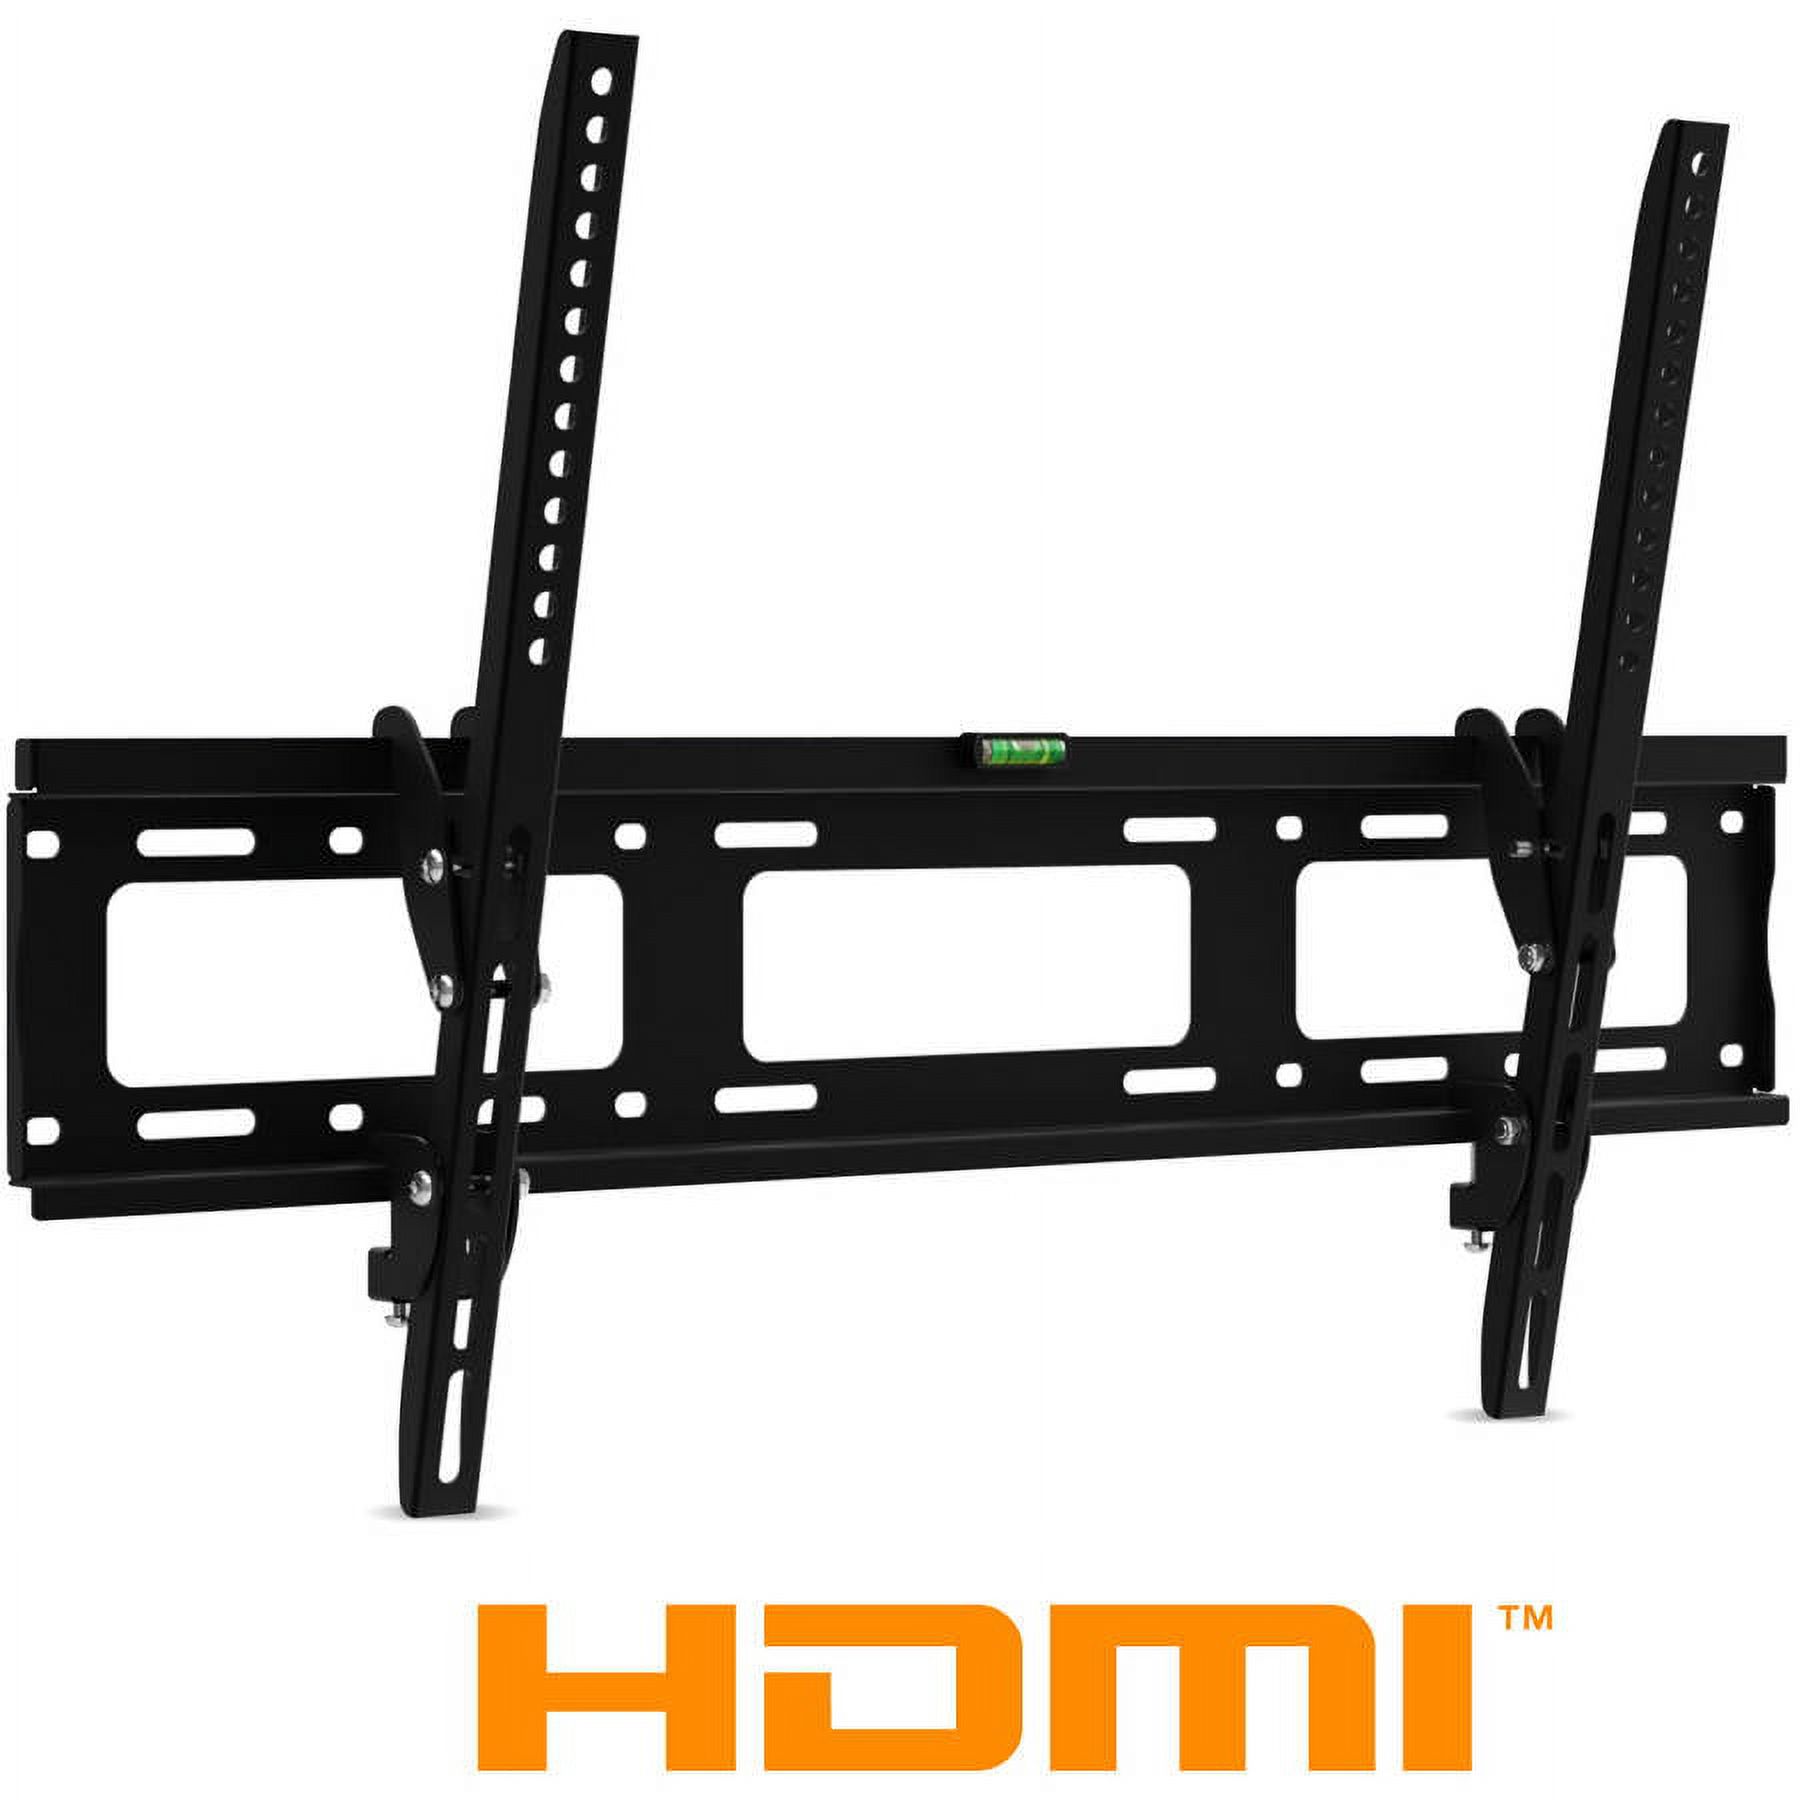 Ematic 30"-79" Tilt/Swivel Universal TV Wall Mount with HDMI Cable (EMW6101) - image 3 of 11